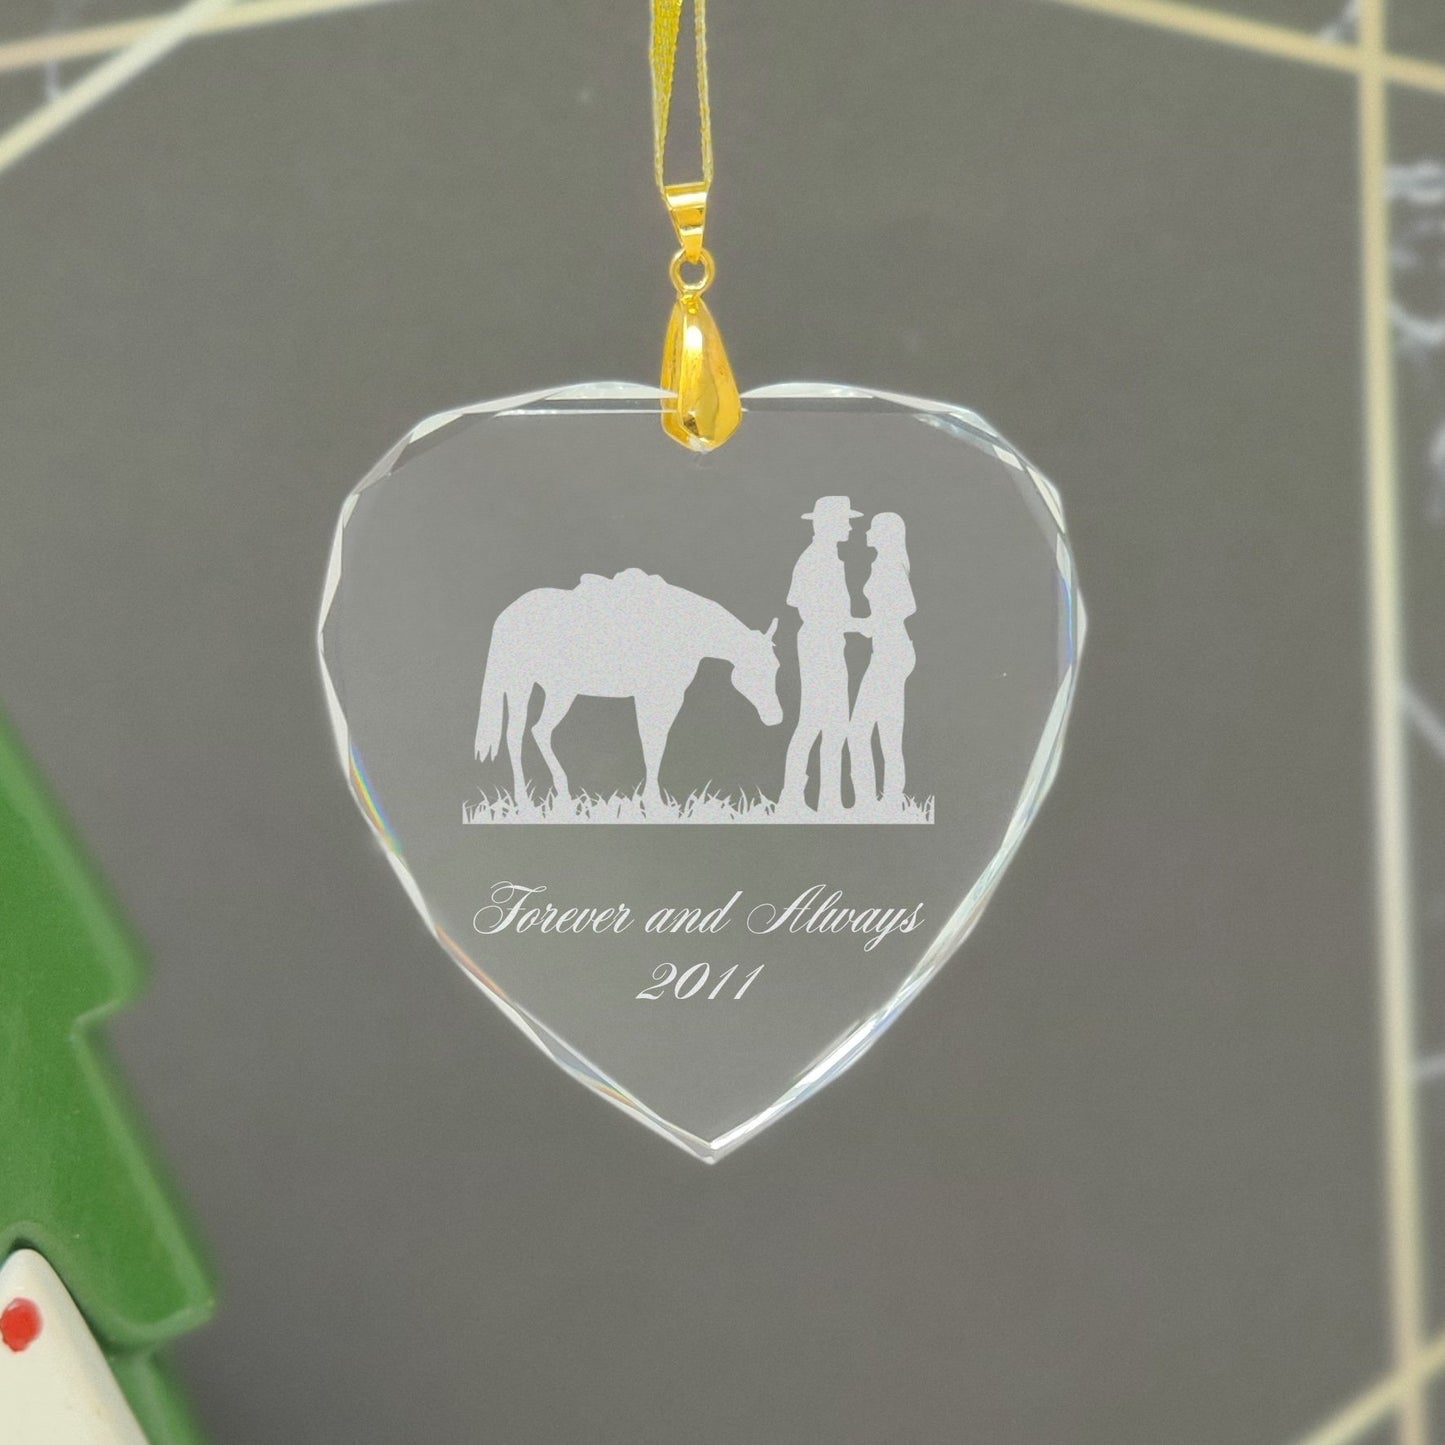 LaserGram Christmas Ornament, Dragon, Personalized Engraving Included (Heart Shape)